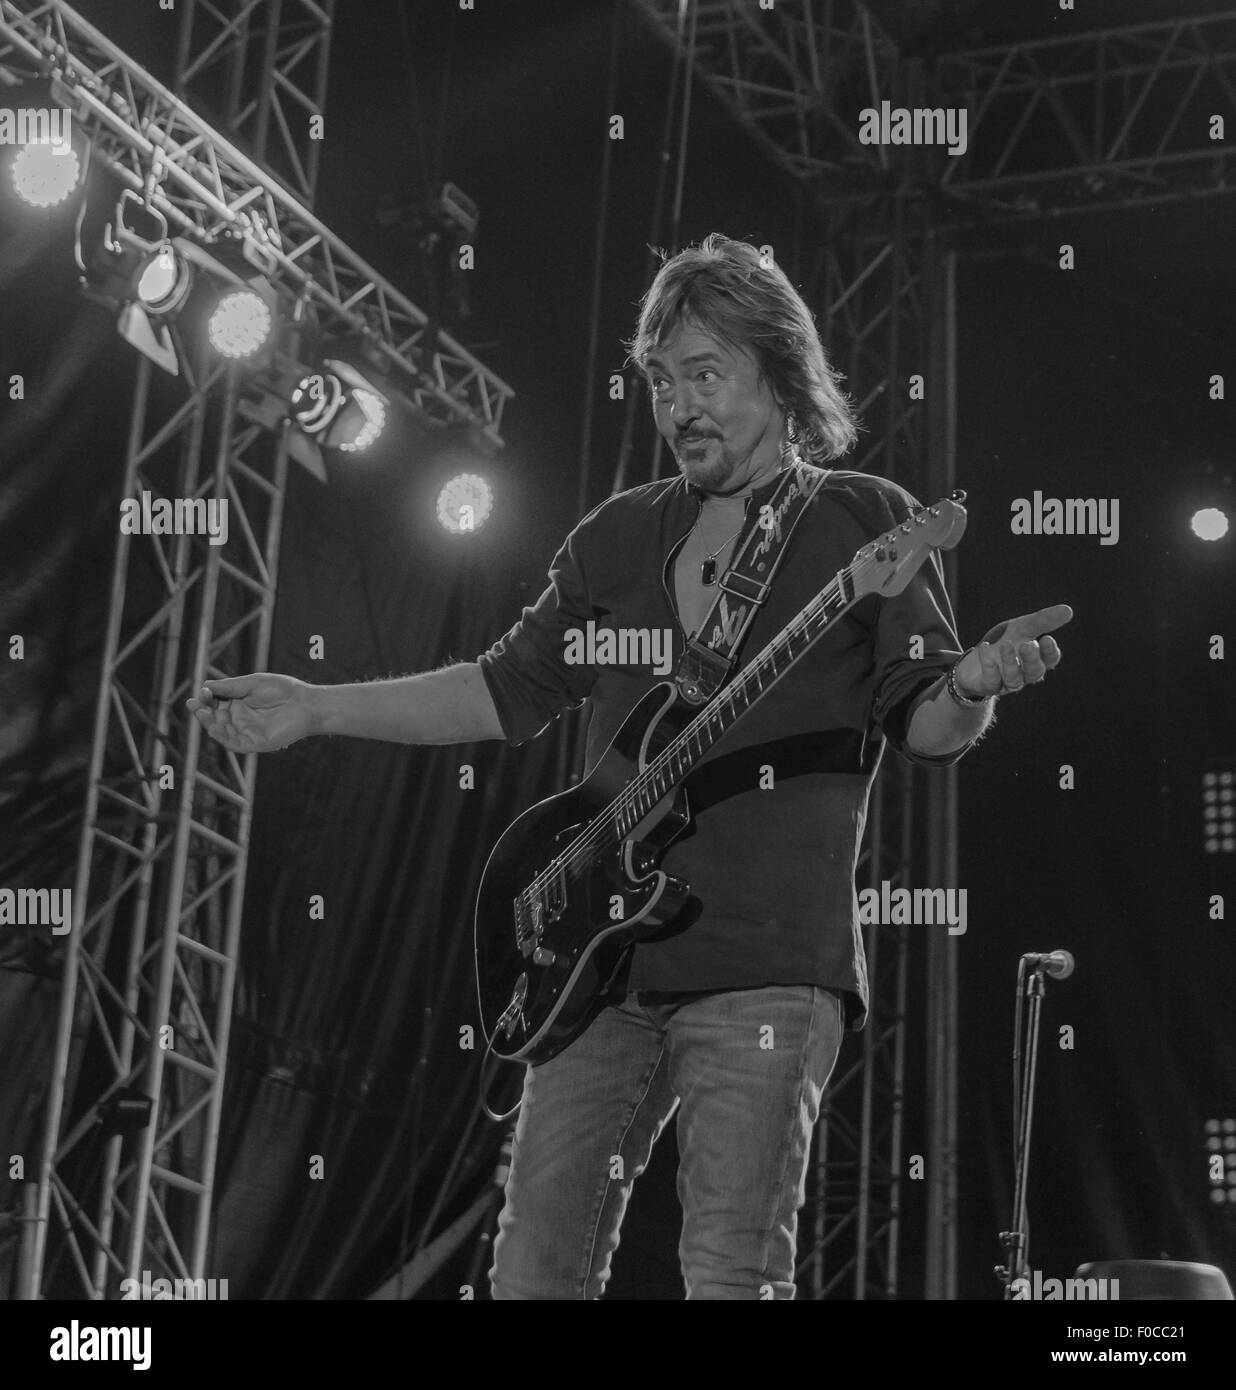 Chris Norman in concert - black and white Stock Photo